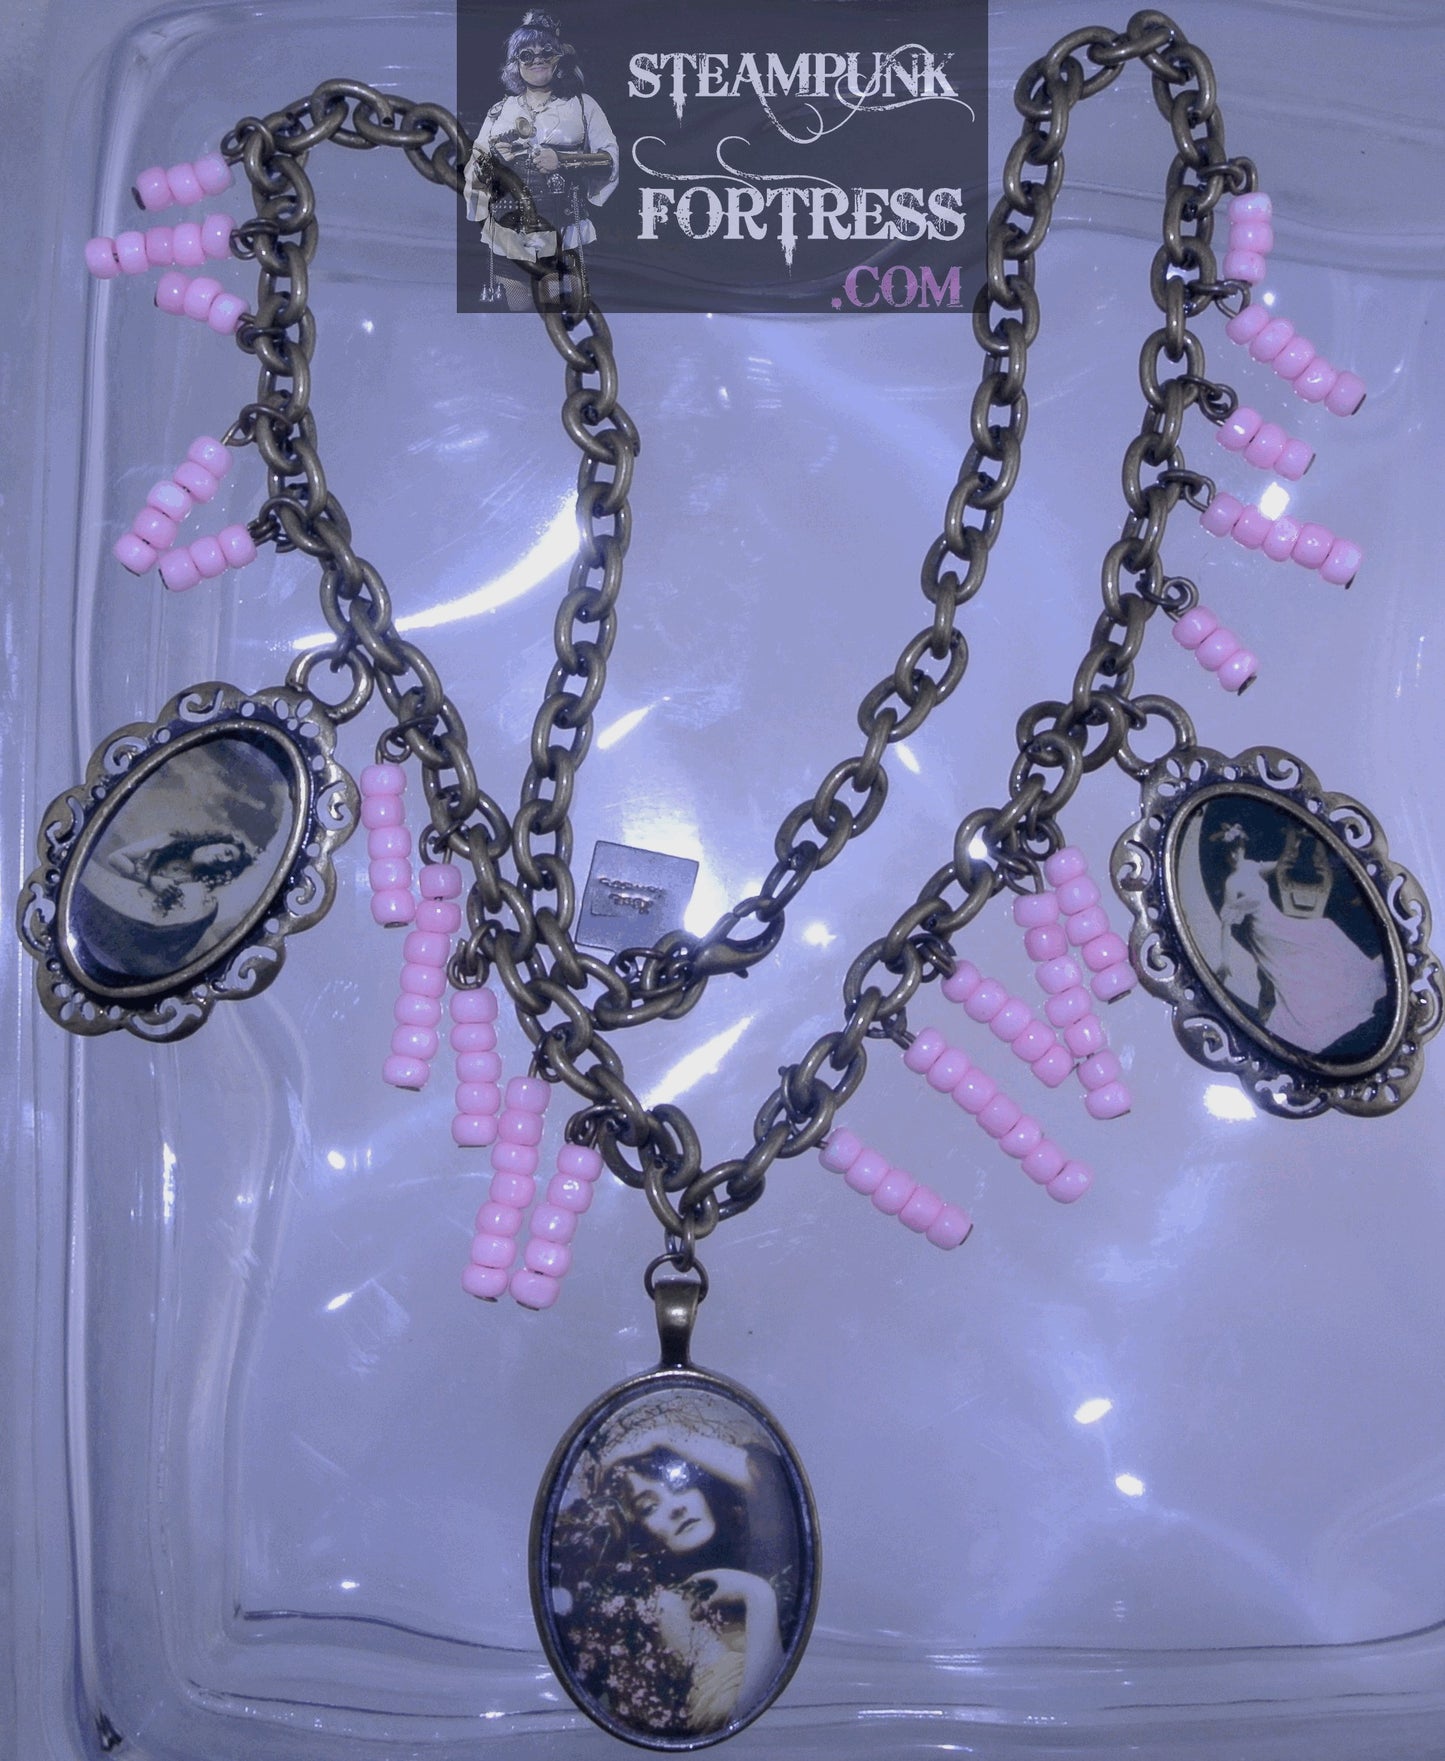 BRASS VINTAGE LADIES WILDFLOWERS 2 FANCY LADIES IN MOON PINK BEADS NECKLACE SET AVAILABLE STARR WILDE STEAMPUNK FORTRESS